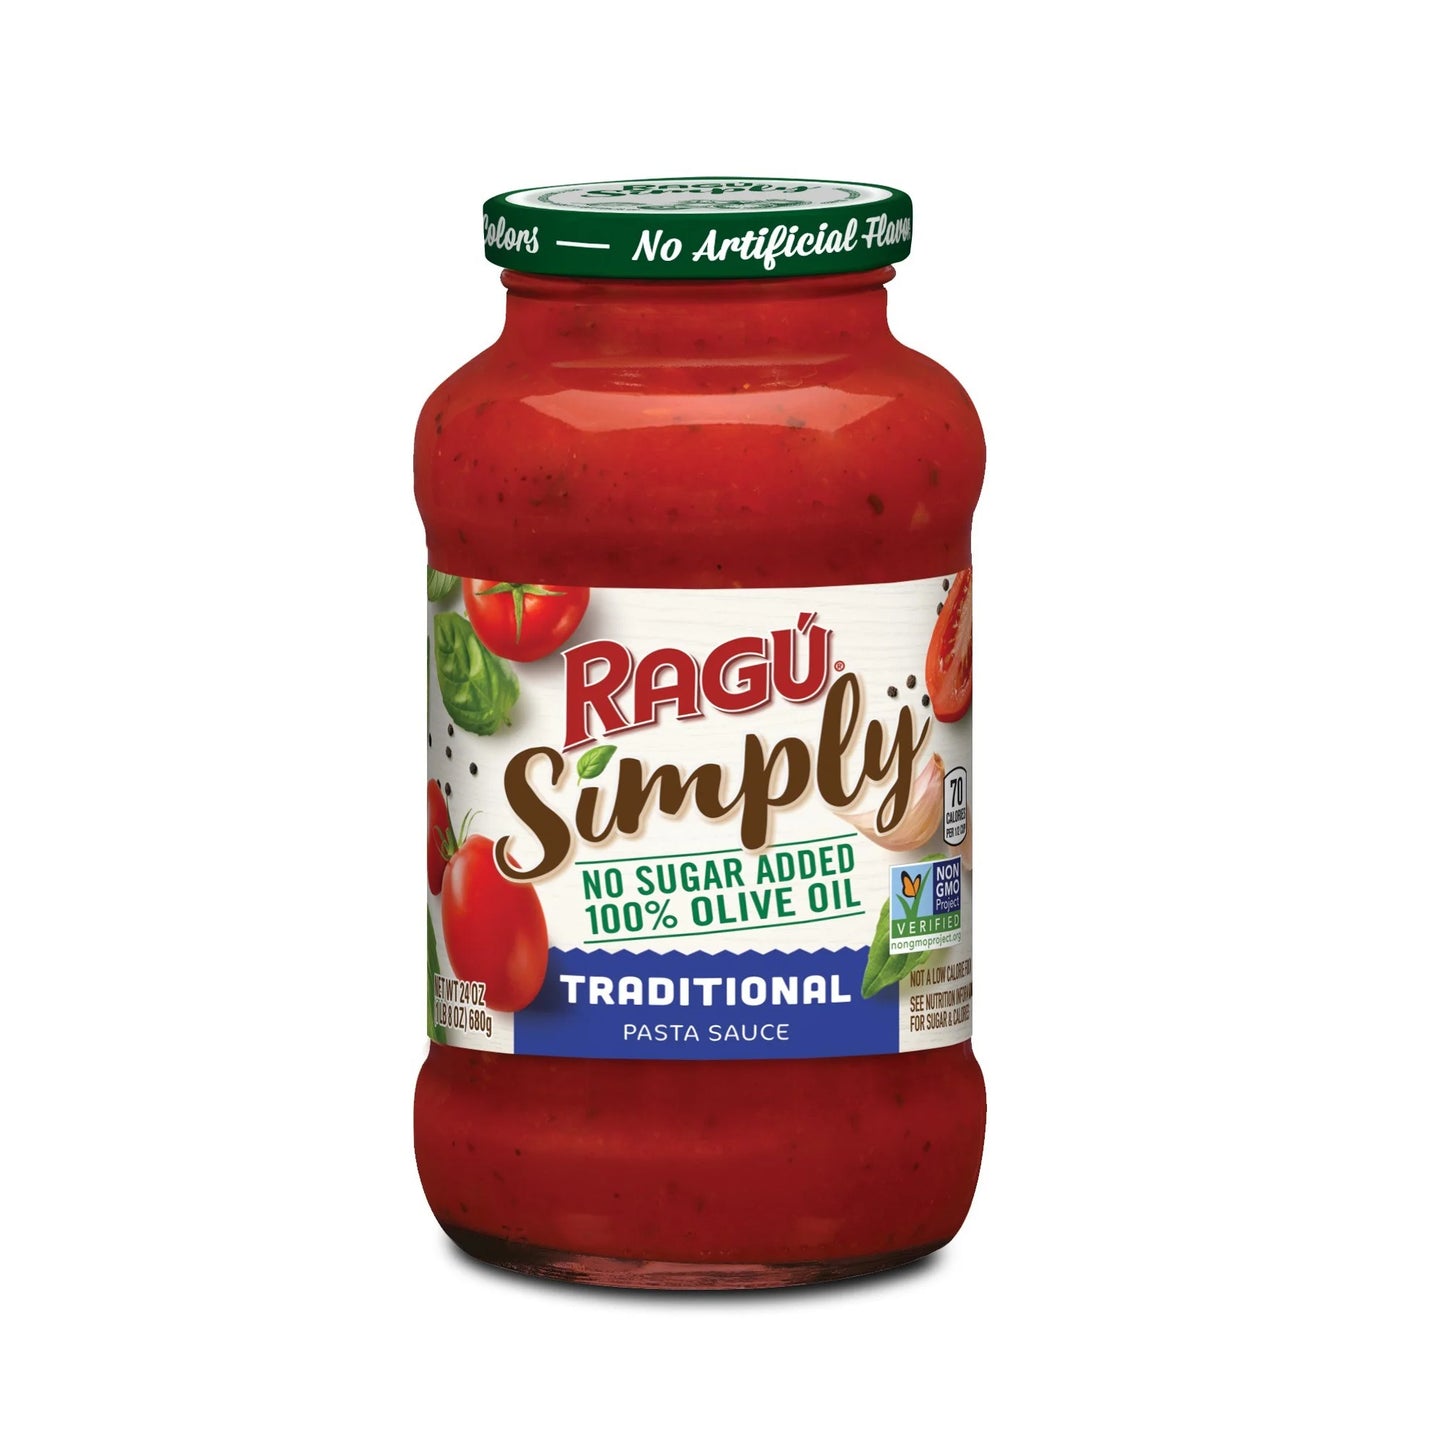 Ragú Simply™ Traditional Pasta Sauce, 24 Oz. (Pack of 16)